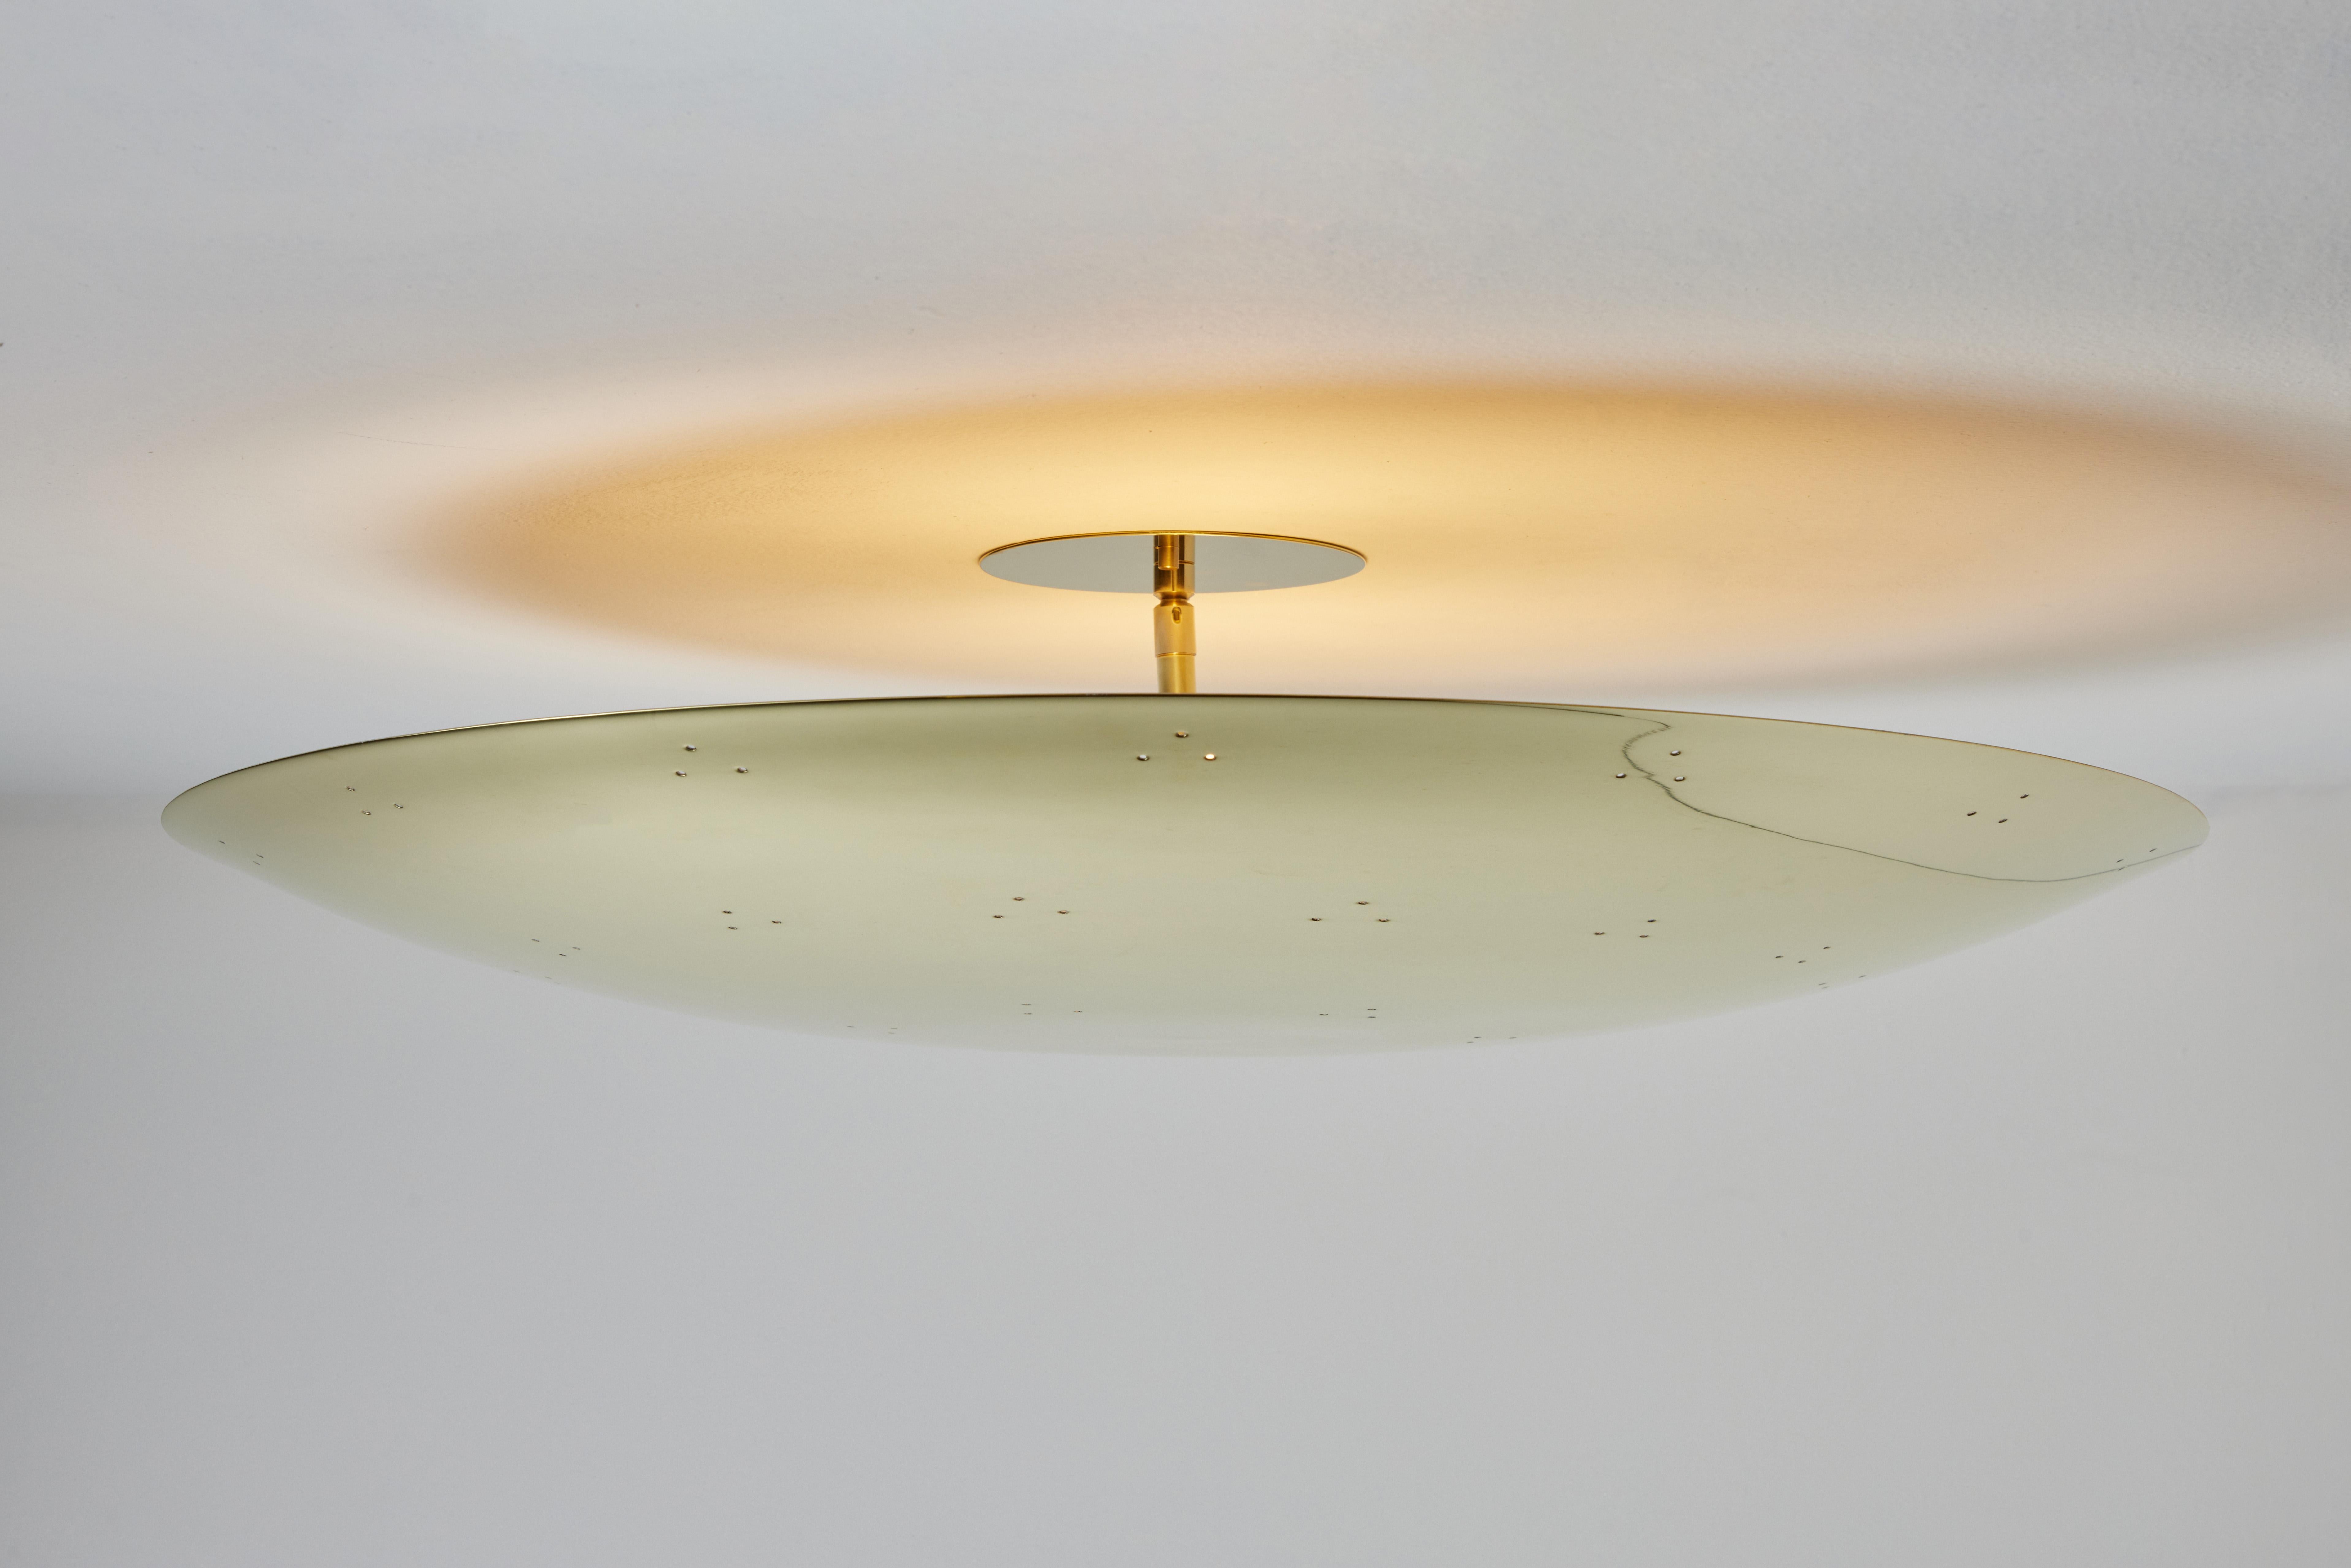 Large Two Enlighten 'Rey' Perforated Polished Brass Dome Ceiling Lamp. Hand-fabricated in Los Angeles, these highly refined ceiling lamps are reminiscent of the iconic midcentury Finnish designs of Paavo Tynell and Lisa Johansson Pape. Executed in